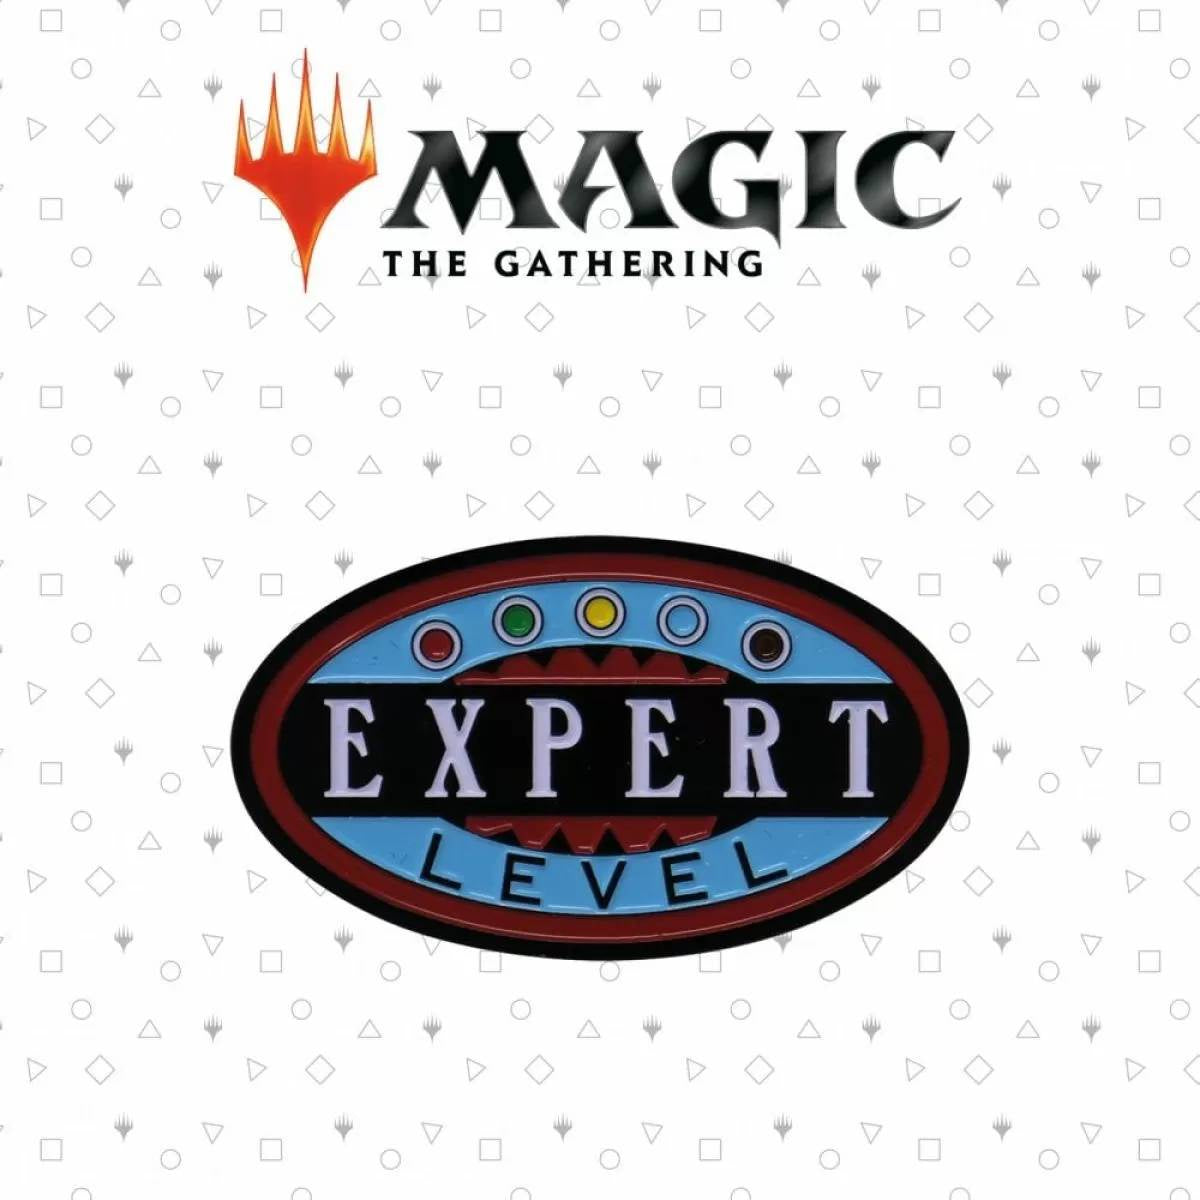 Magic: The Gathering Expert Level Limited Edition Pin Badge